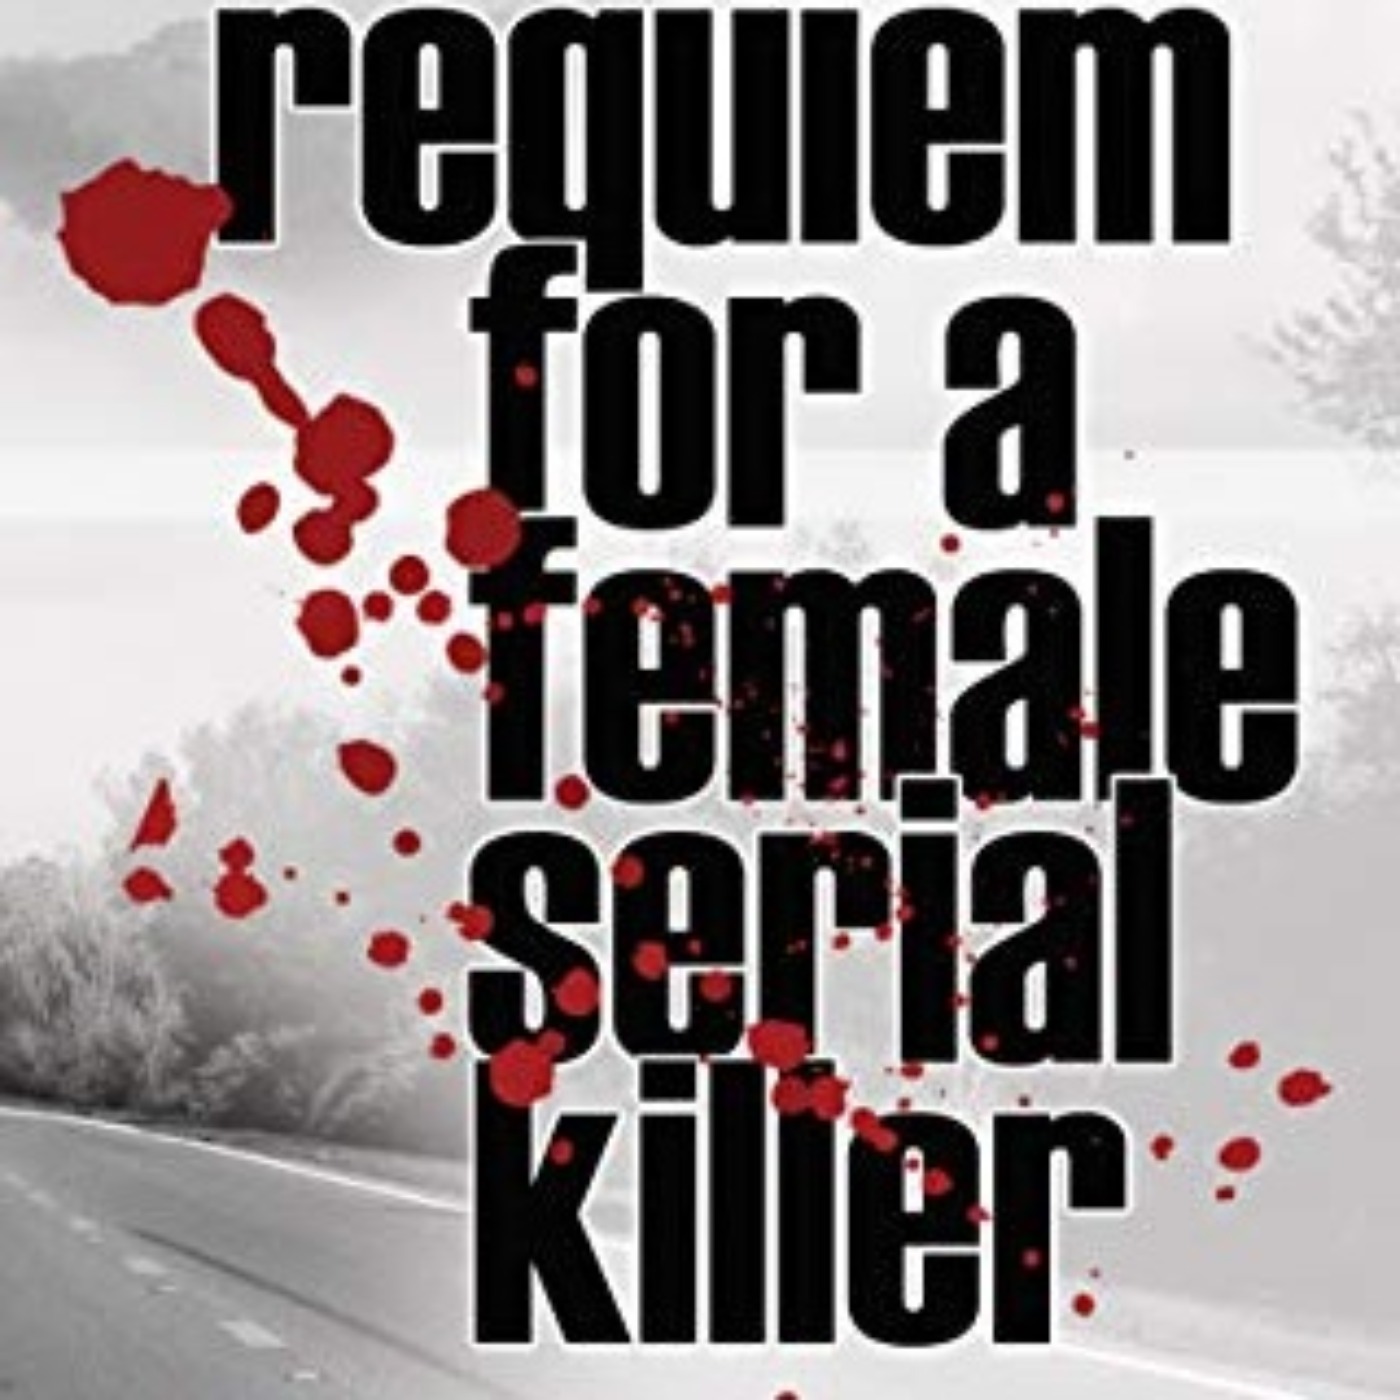 PHYLLIS CHESLER - REQUIEM FOR A FEMALE SERIAL KILLER